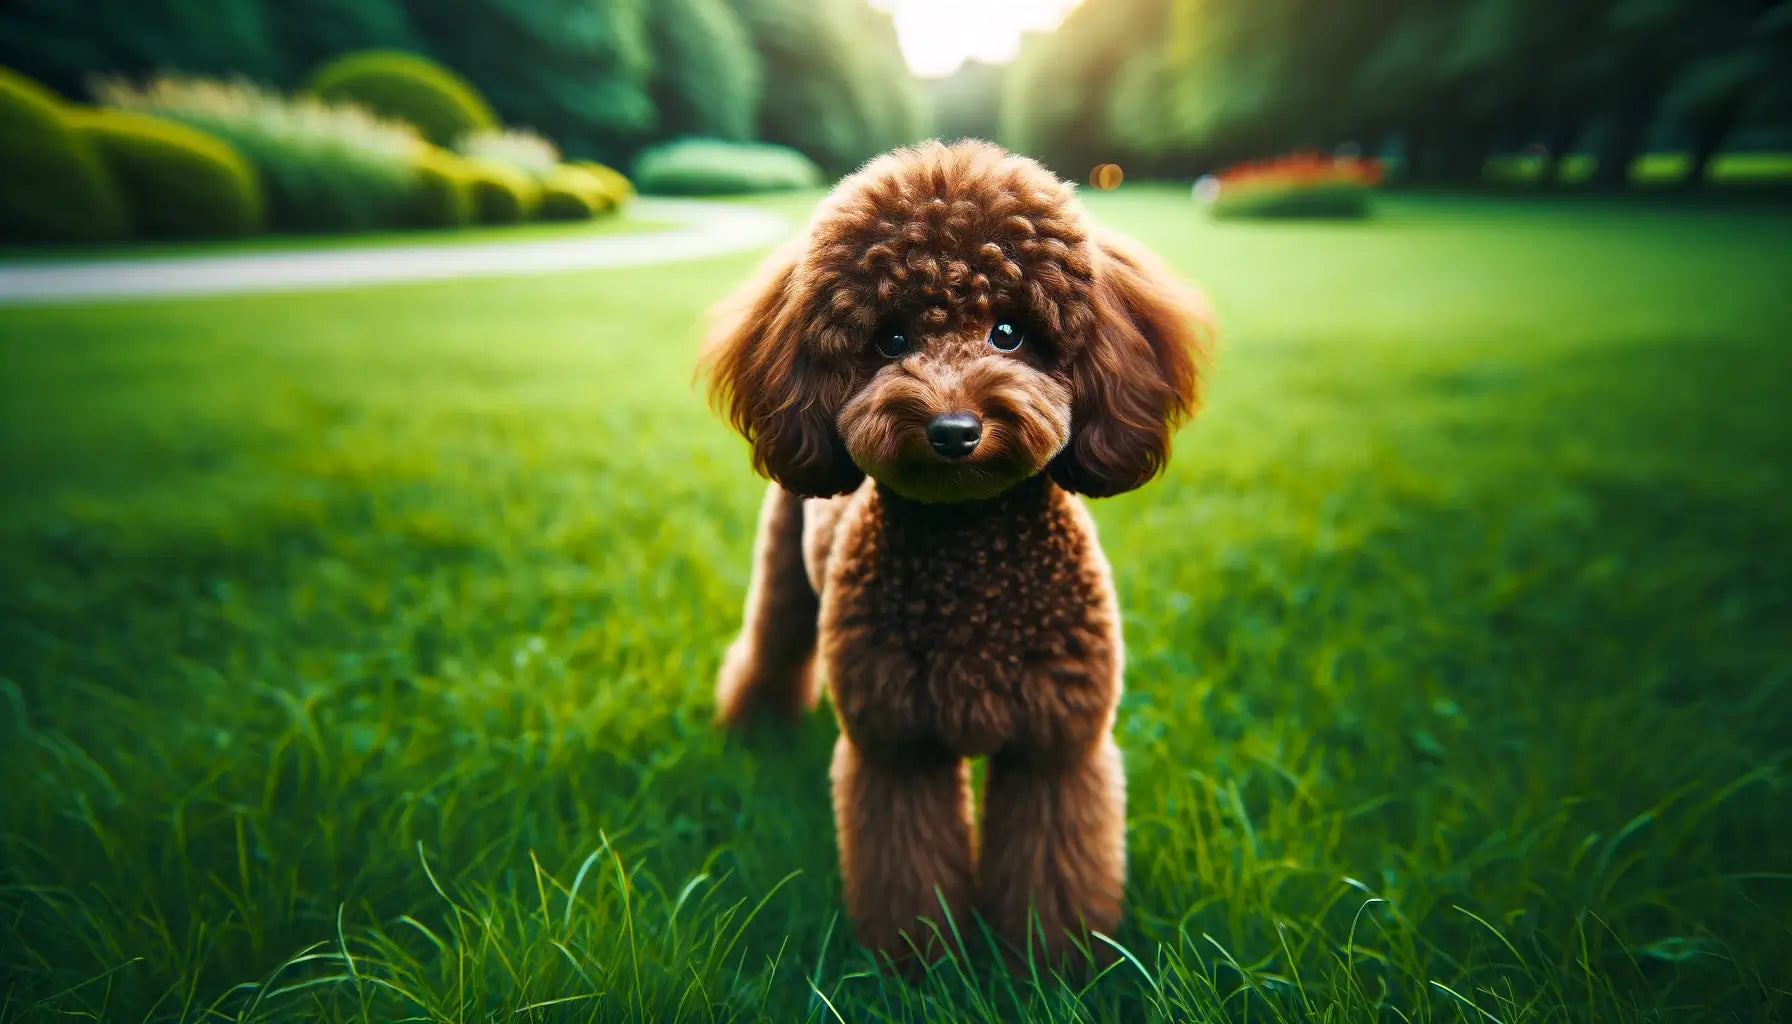 A brown Poodle standing on grass with its head slightly tilted, giving it a curious and engaging look.